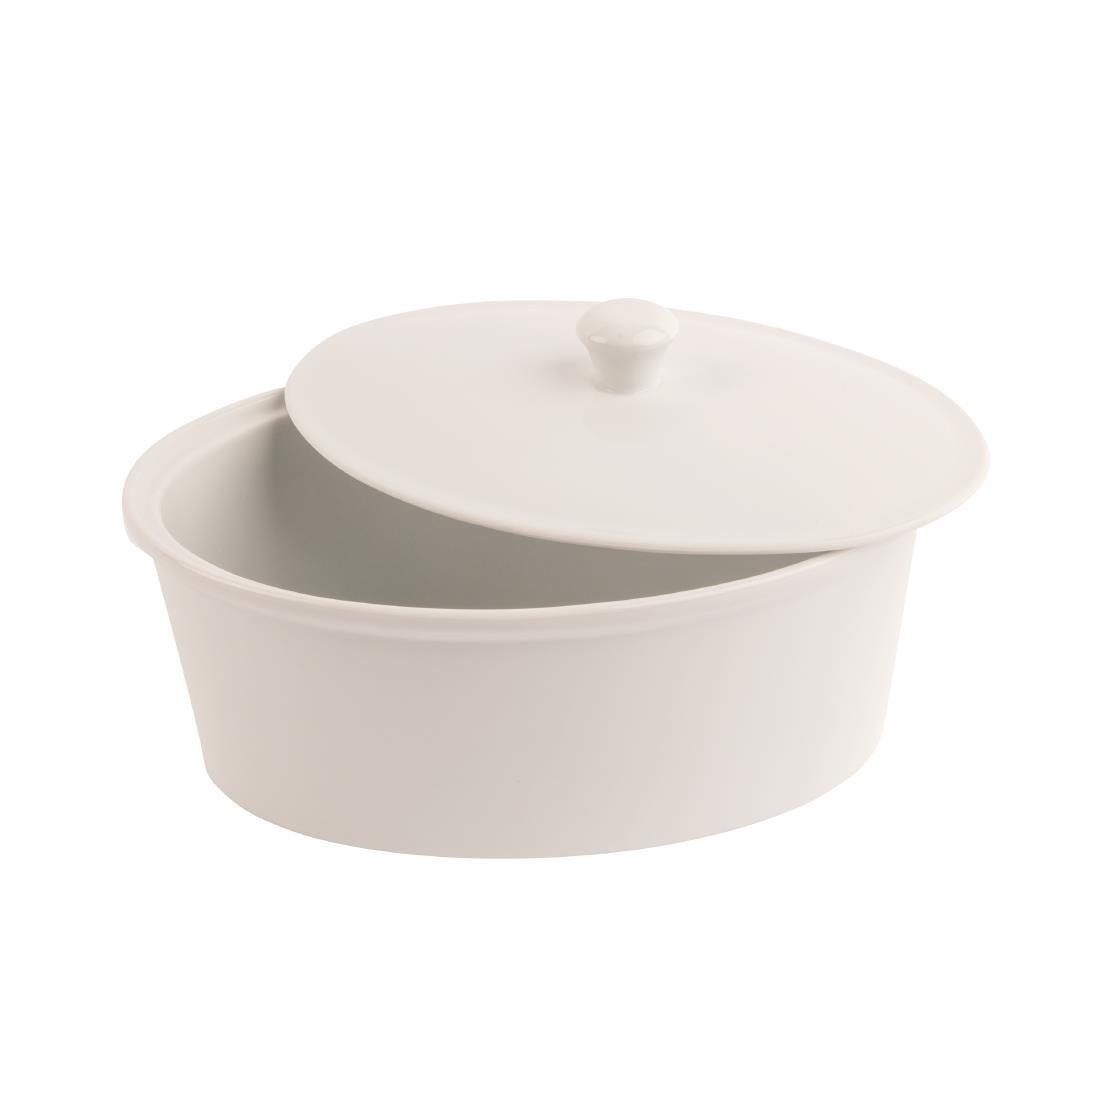 Olympia Whiteware Oval Casserole Dish with Lid 2.2Ltr - CB712  - 3